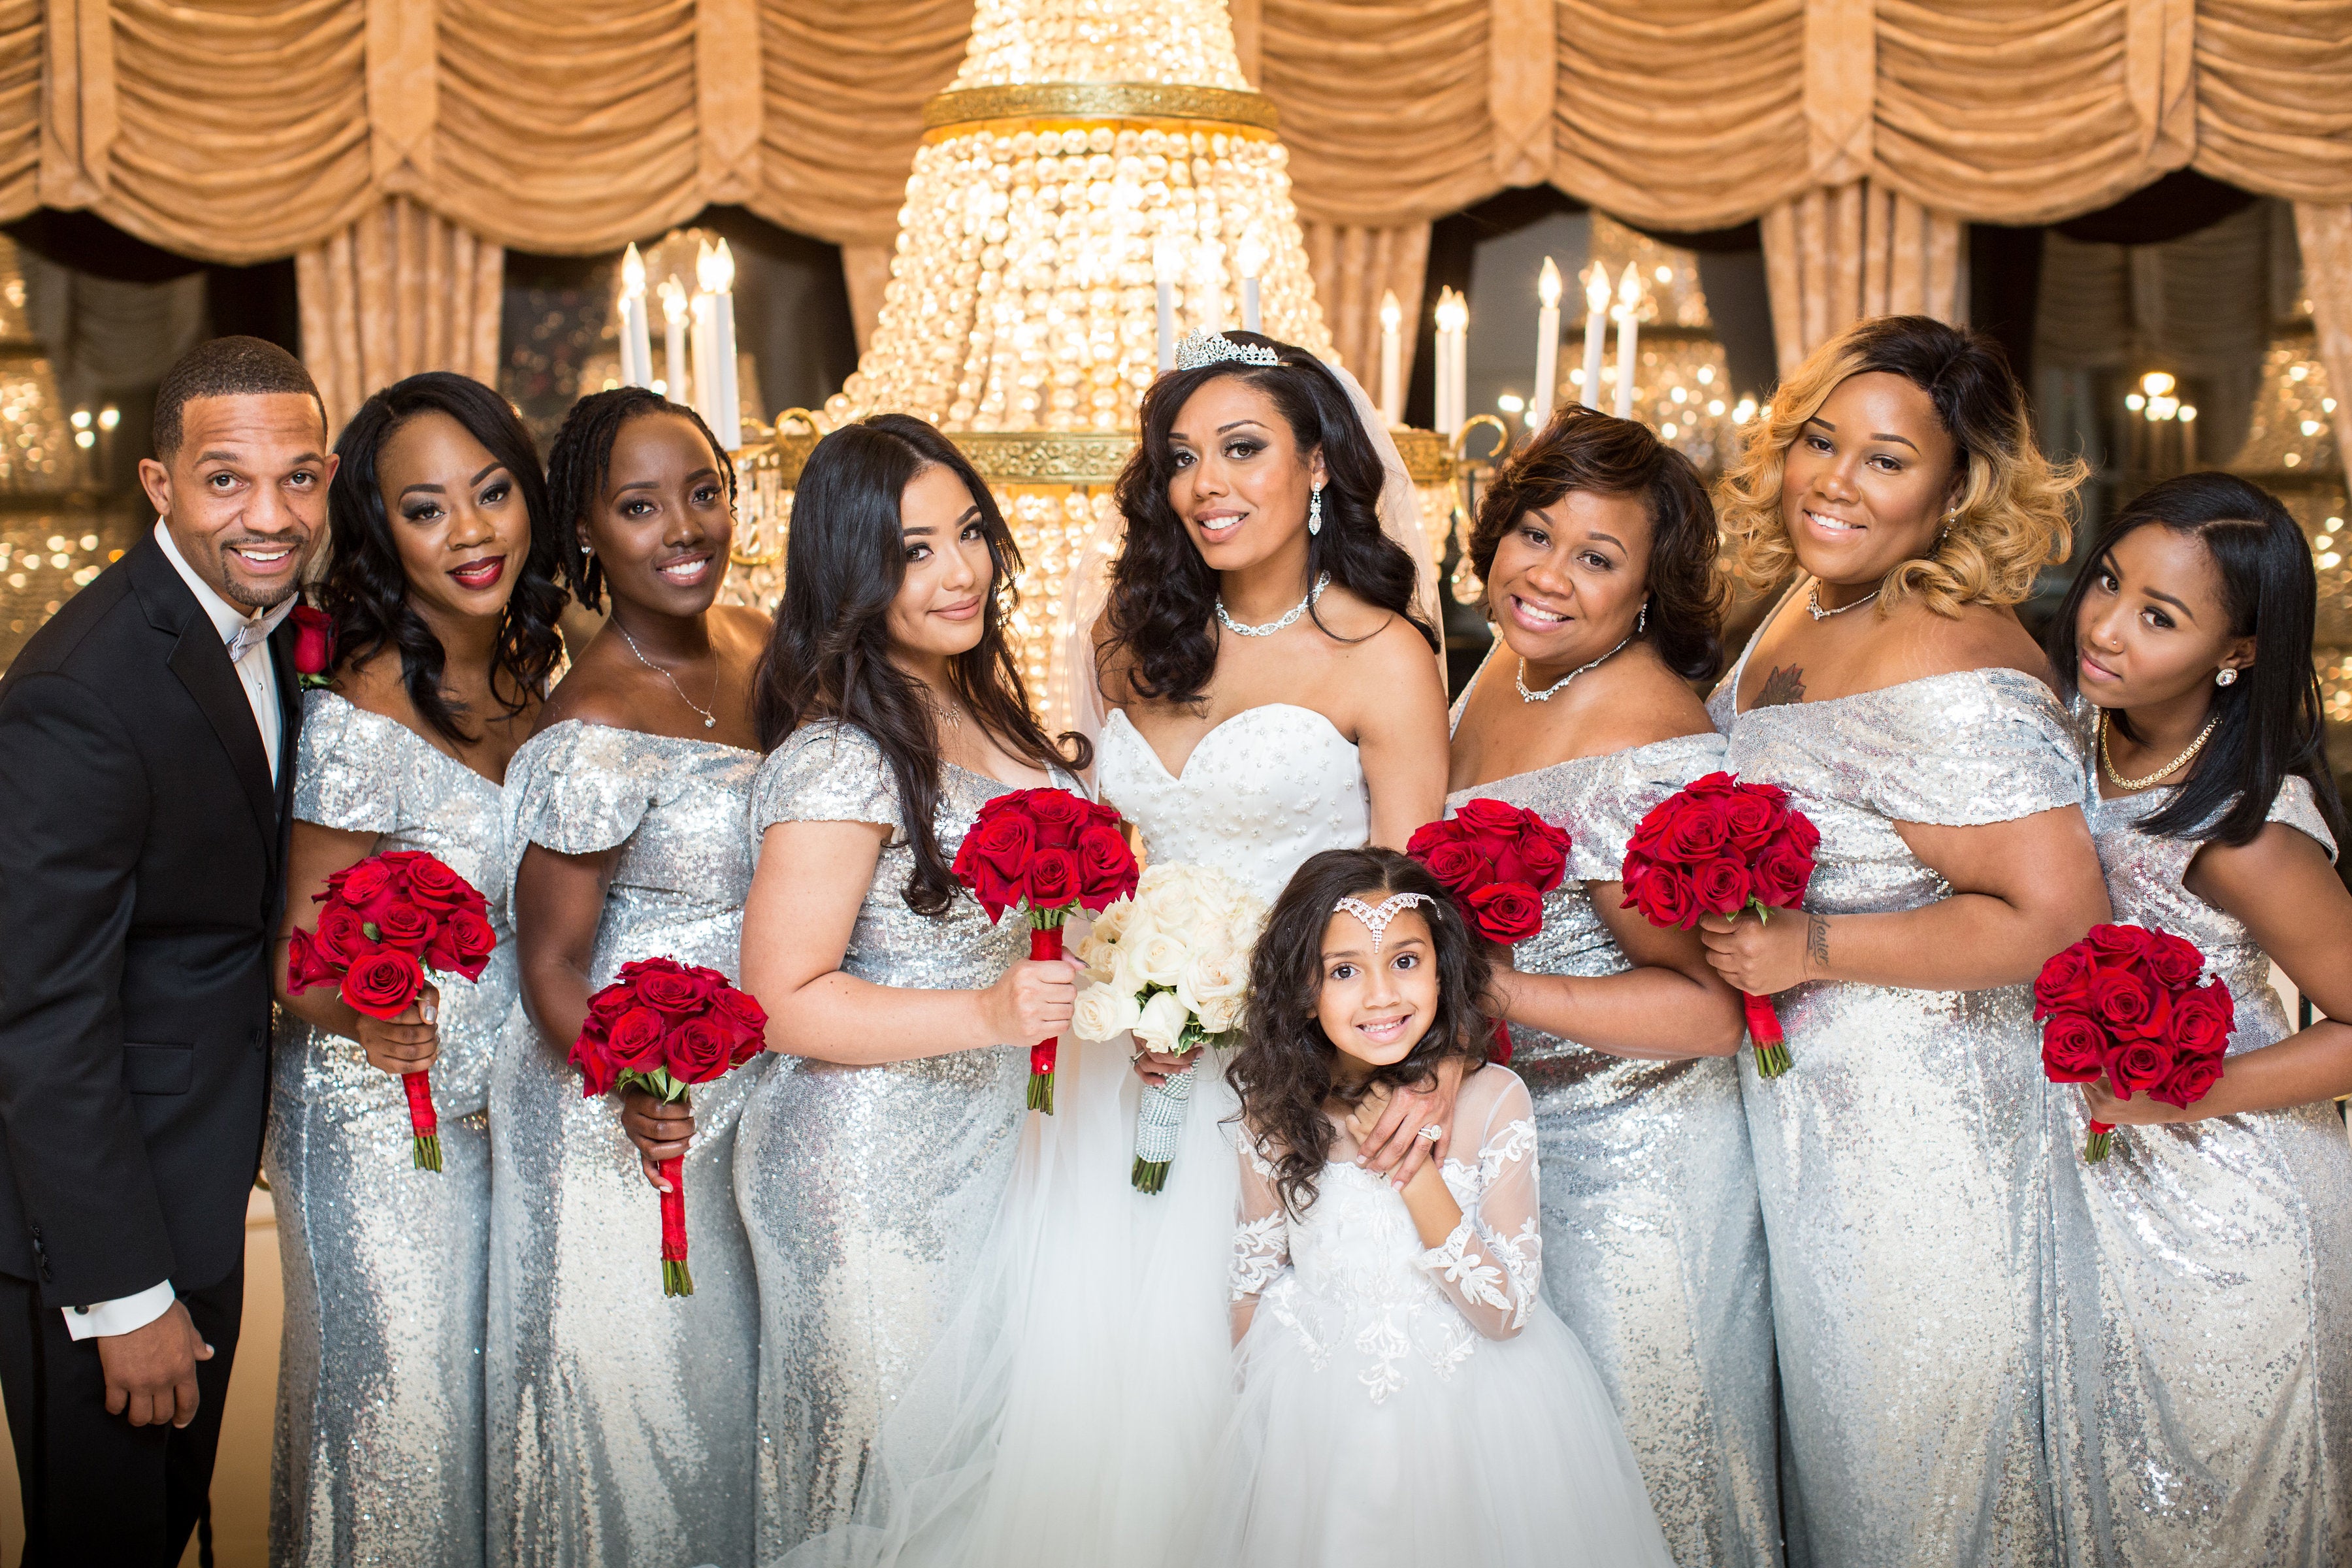 Bridal Bliss: Rahman And Gina's Romantic Winter Wedding Was One Of A Kind
